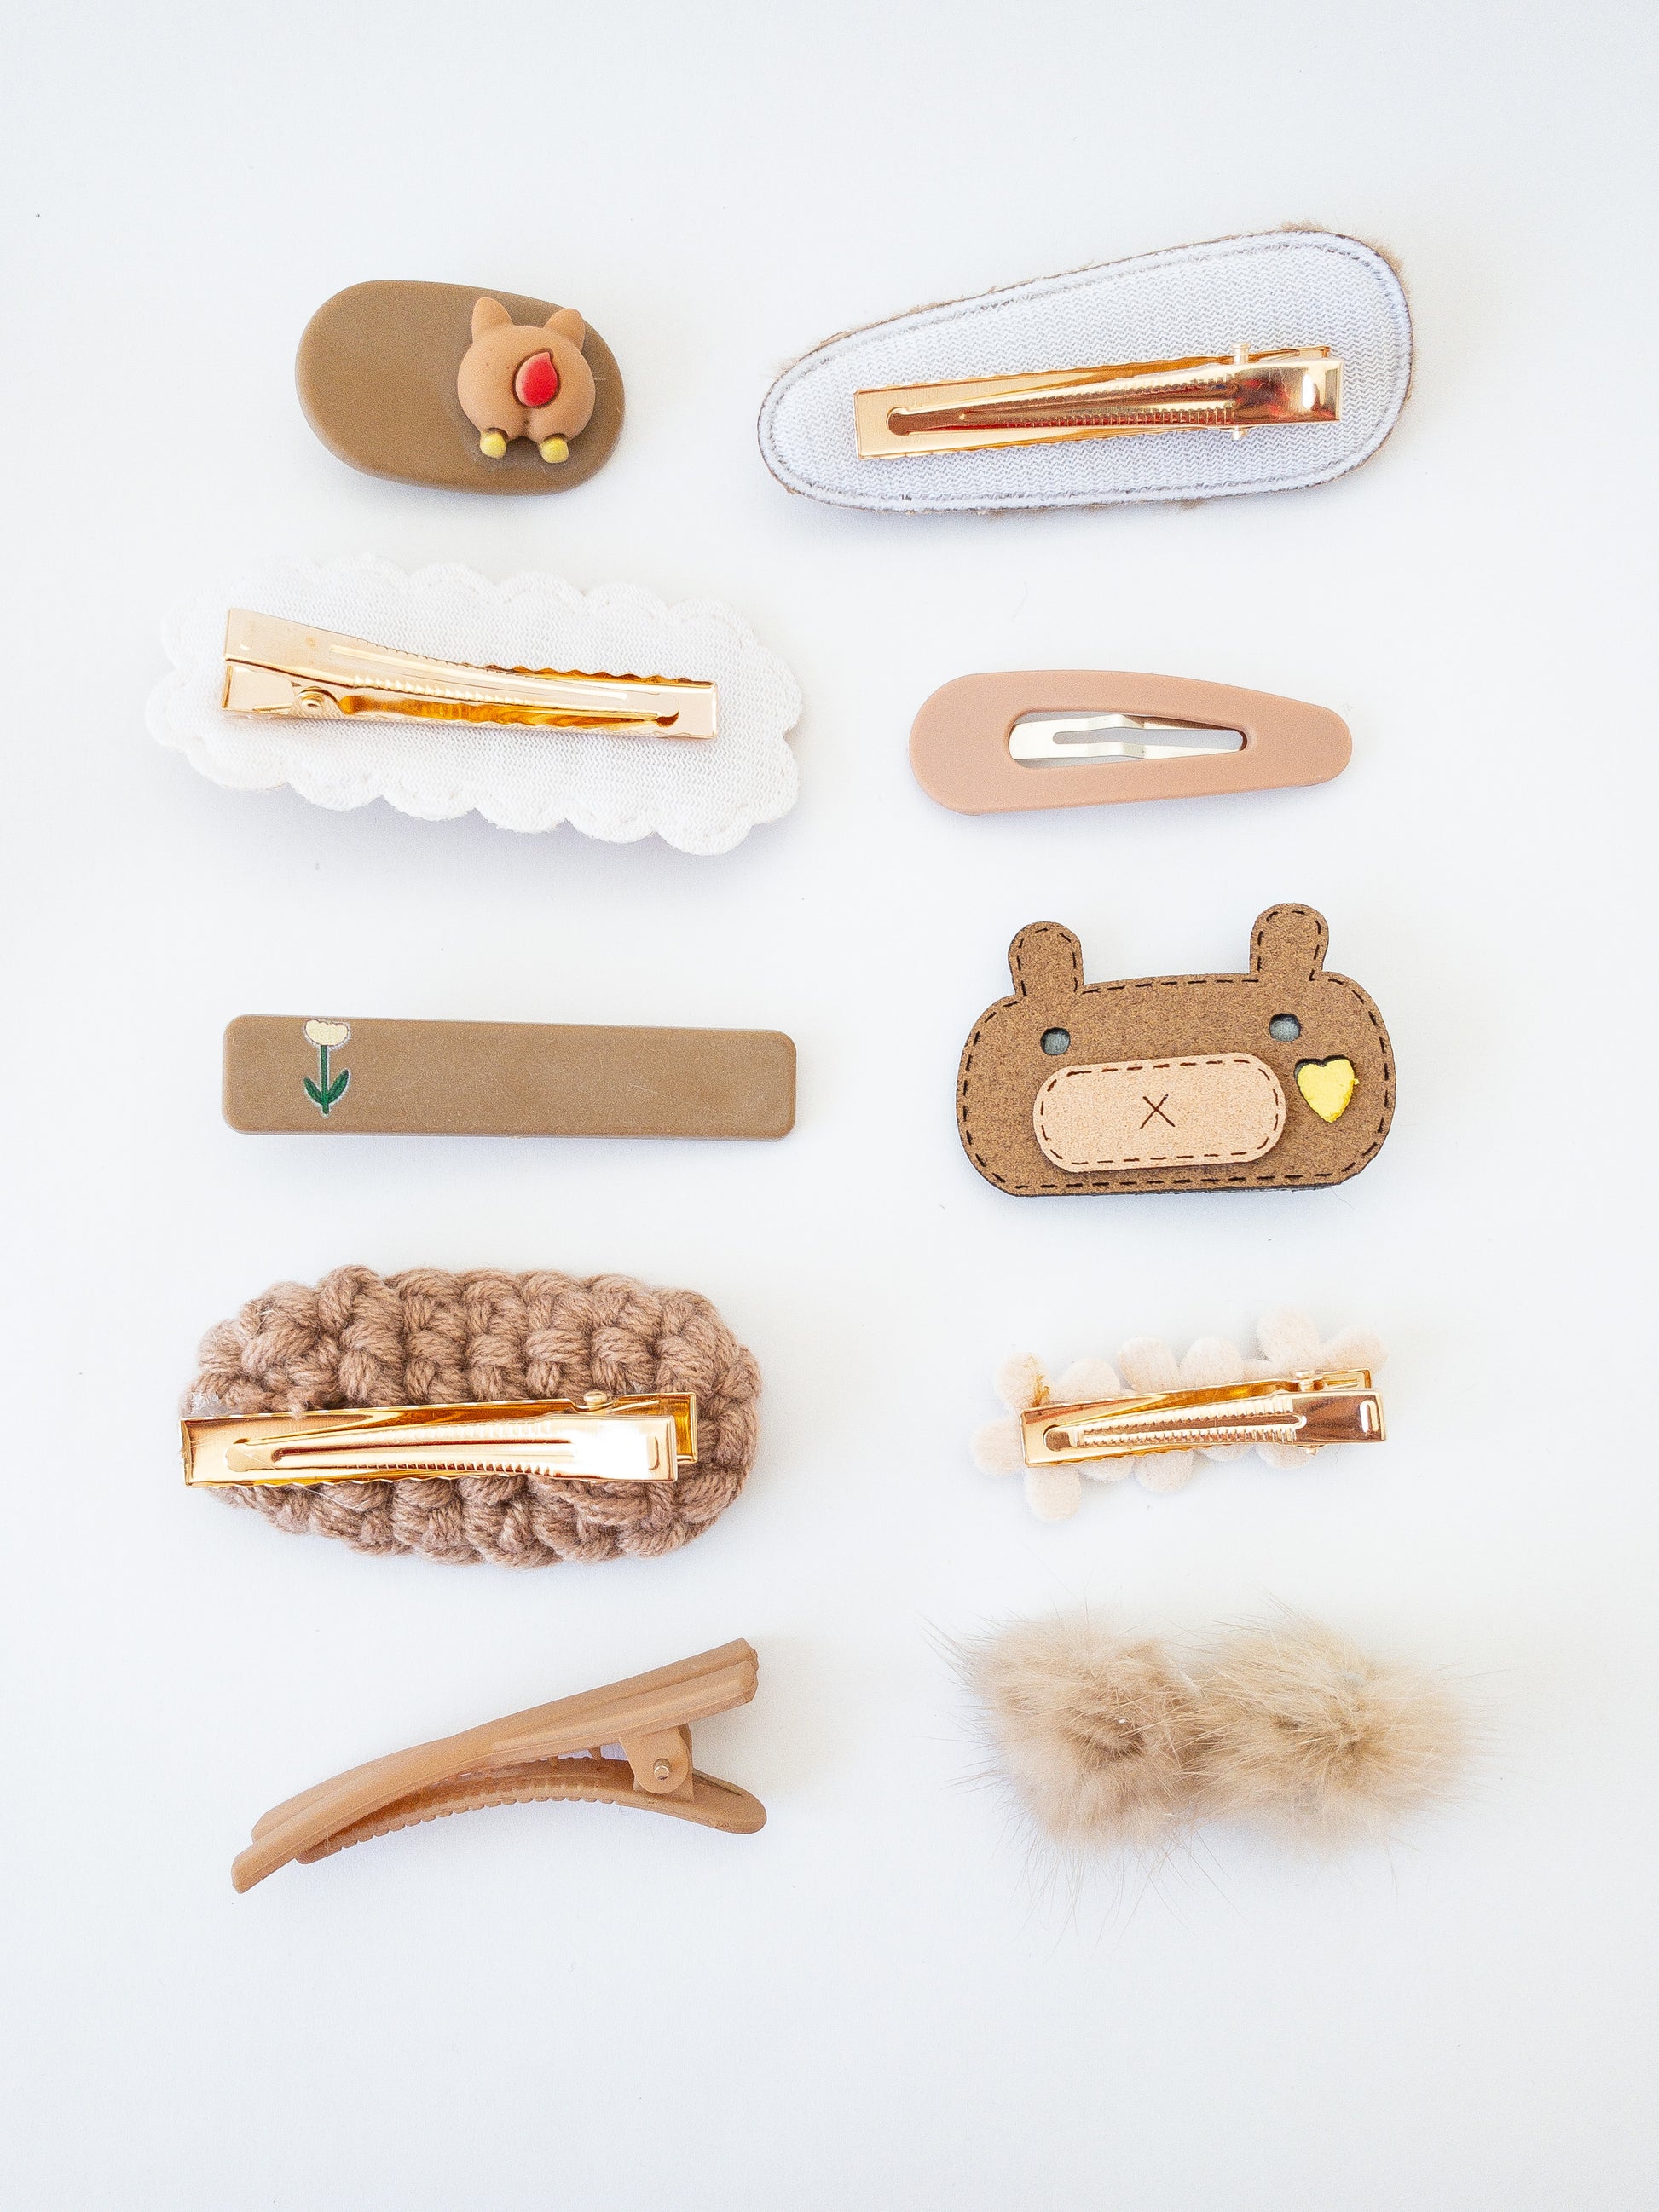 The ultimate set with both cute and classic pieces! There are a total of 10 hair clips in this set. A criss corss alligator clip, an oval crocheted nest, a loving brown bear, a sherpa clip with a soft brown heart, rabbit fur pom poms, a classic rectangular hair clip with a pretty tulip, an oval alligator clip with the cute backside of a bear, a small hair clip with 3 felt flowers, a triangular snap clip and a rabbit fur triangular hair clip.